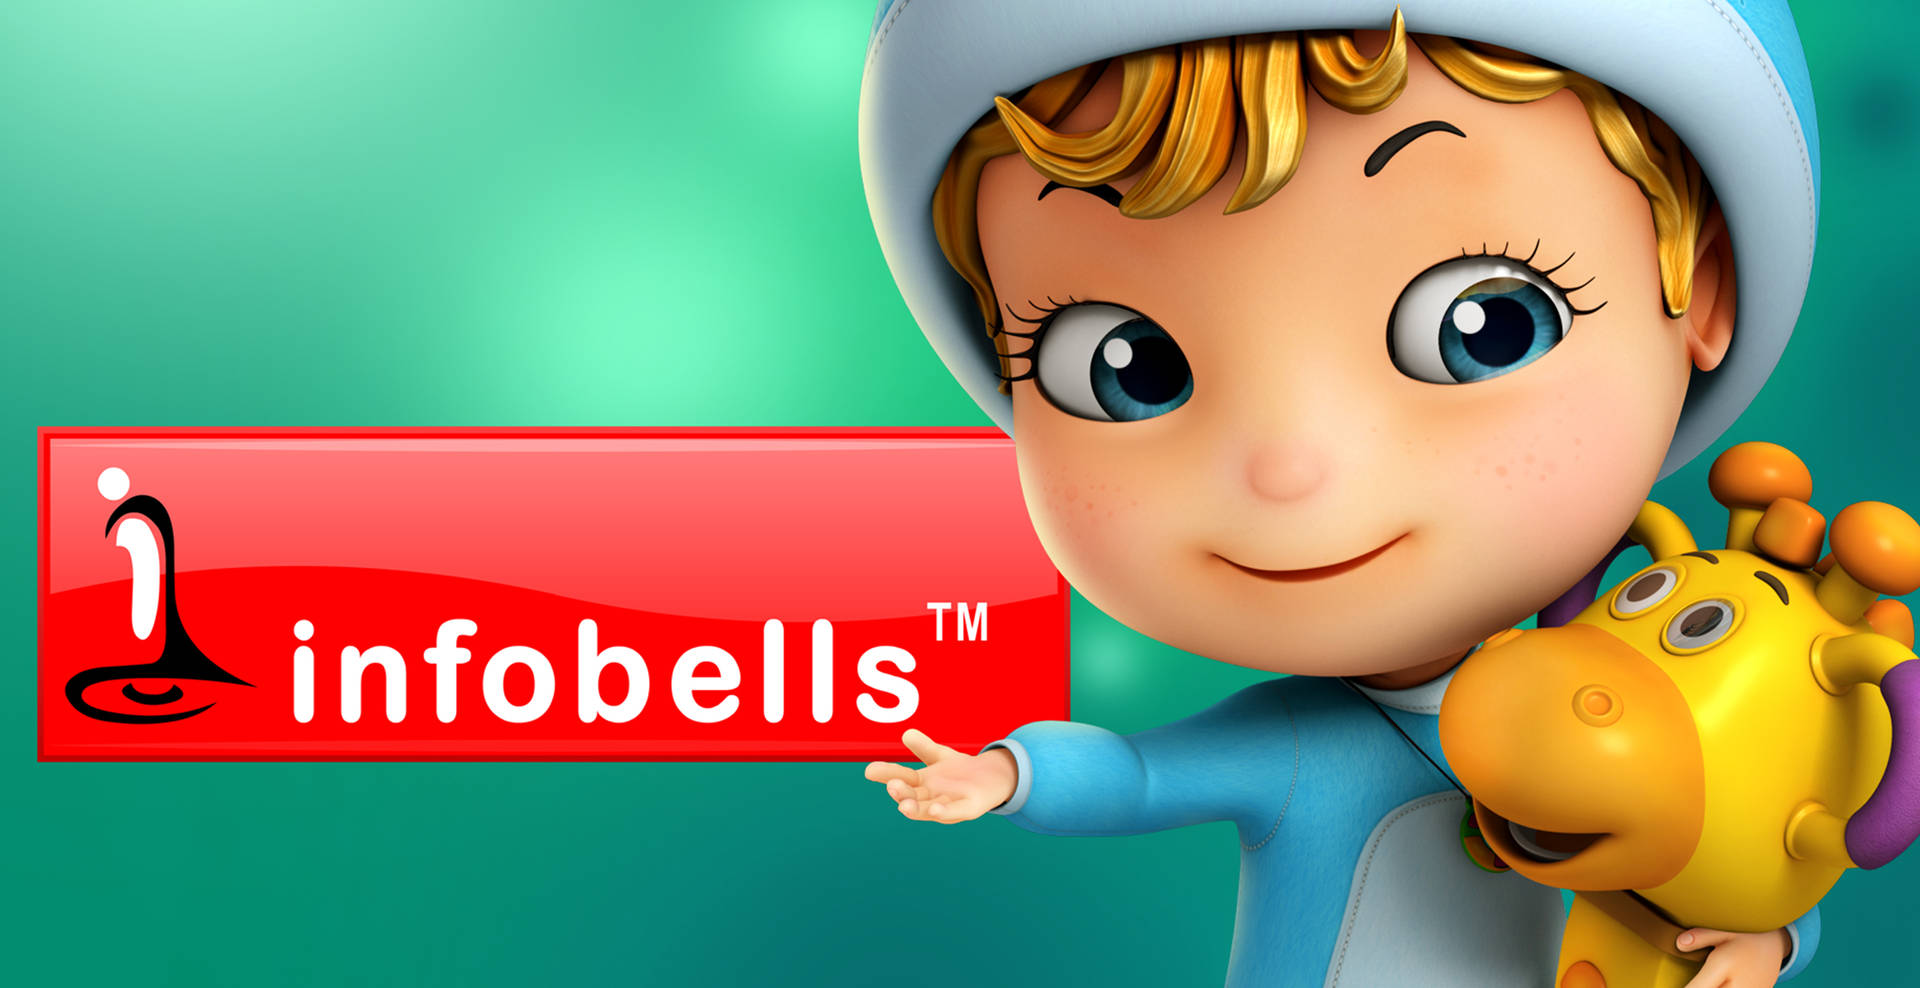 Download Infobells Baby And Cow Toy Wallpaper 